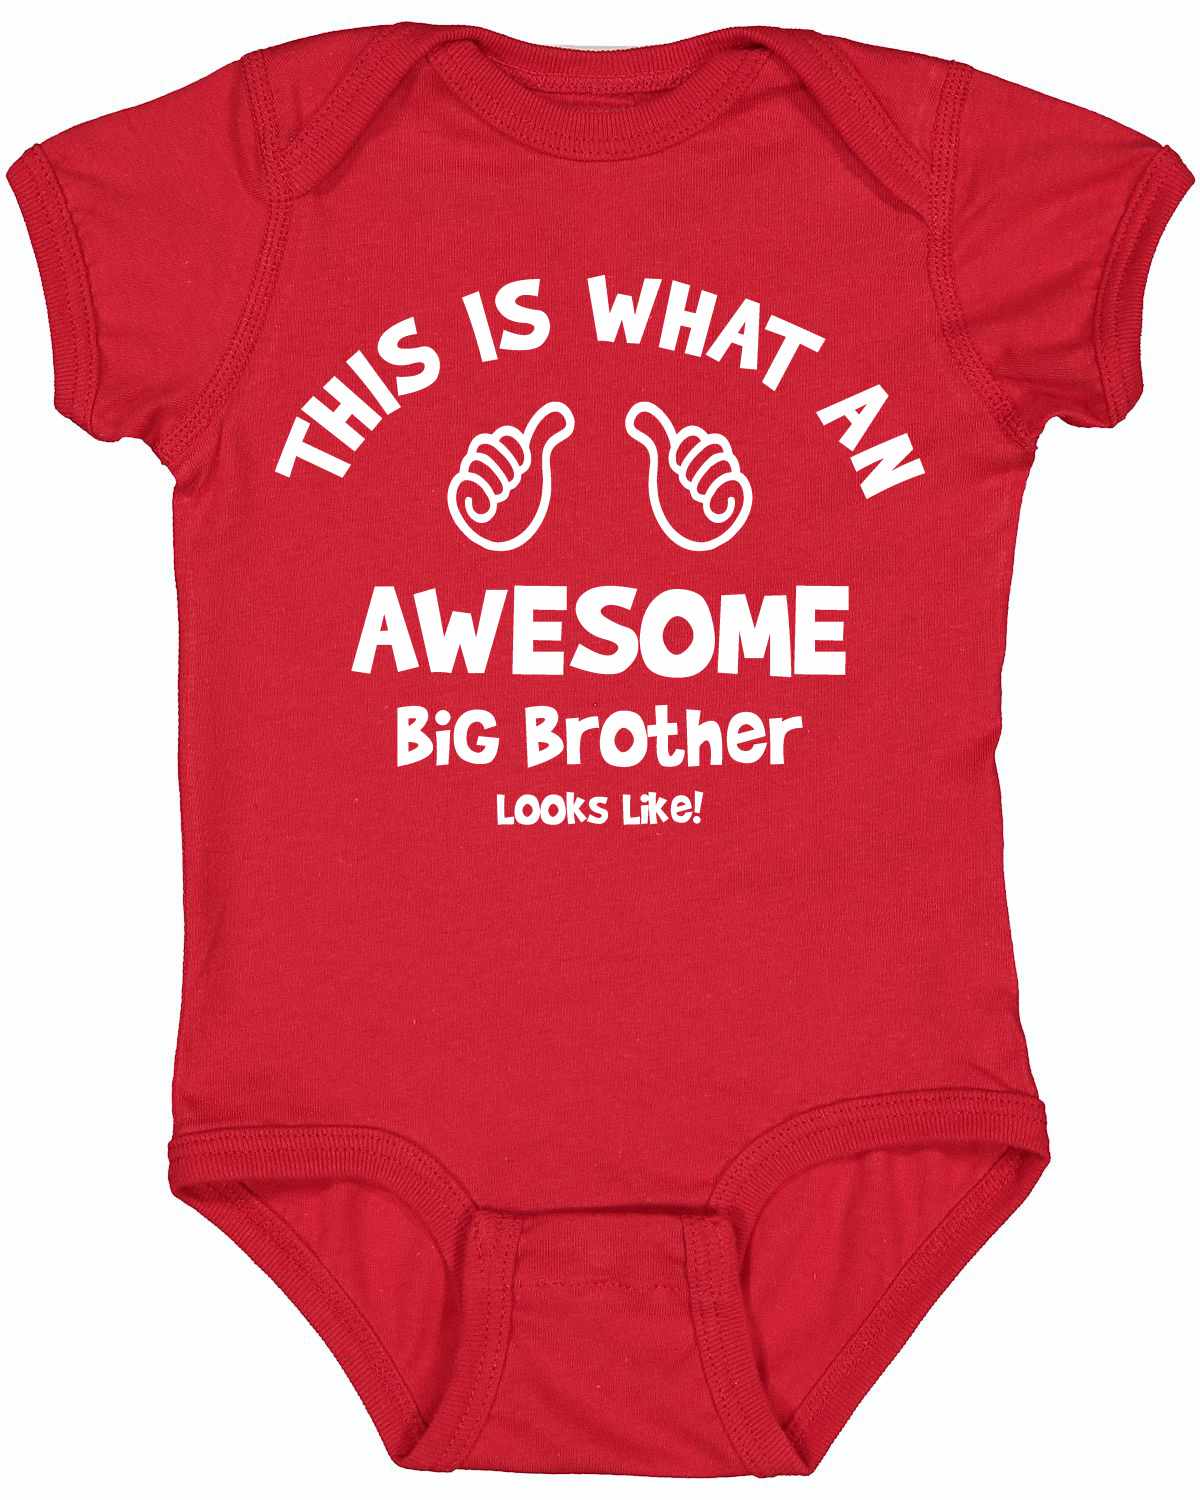 This is What an AWESOME BIG BROTHER Looks Like Infant BodySuit (#964-10)